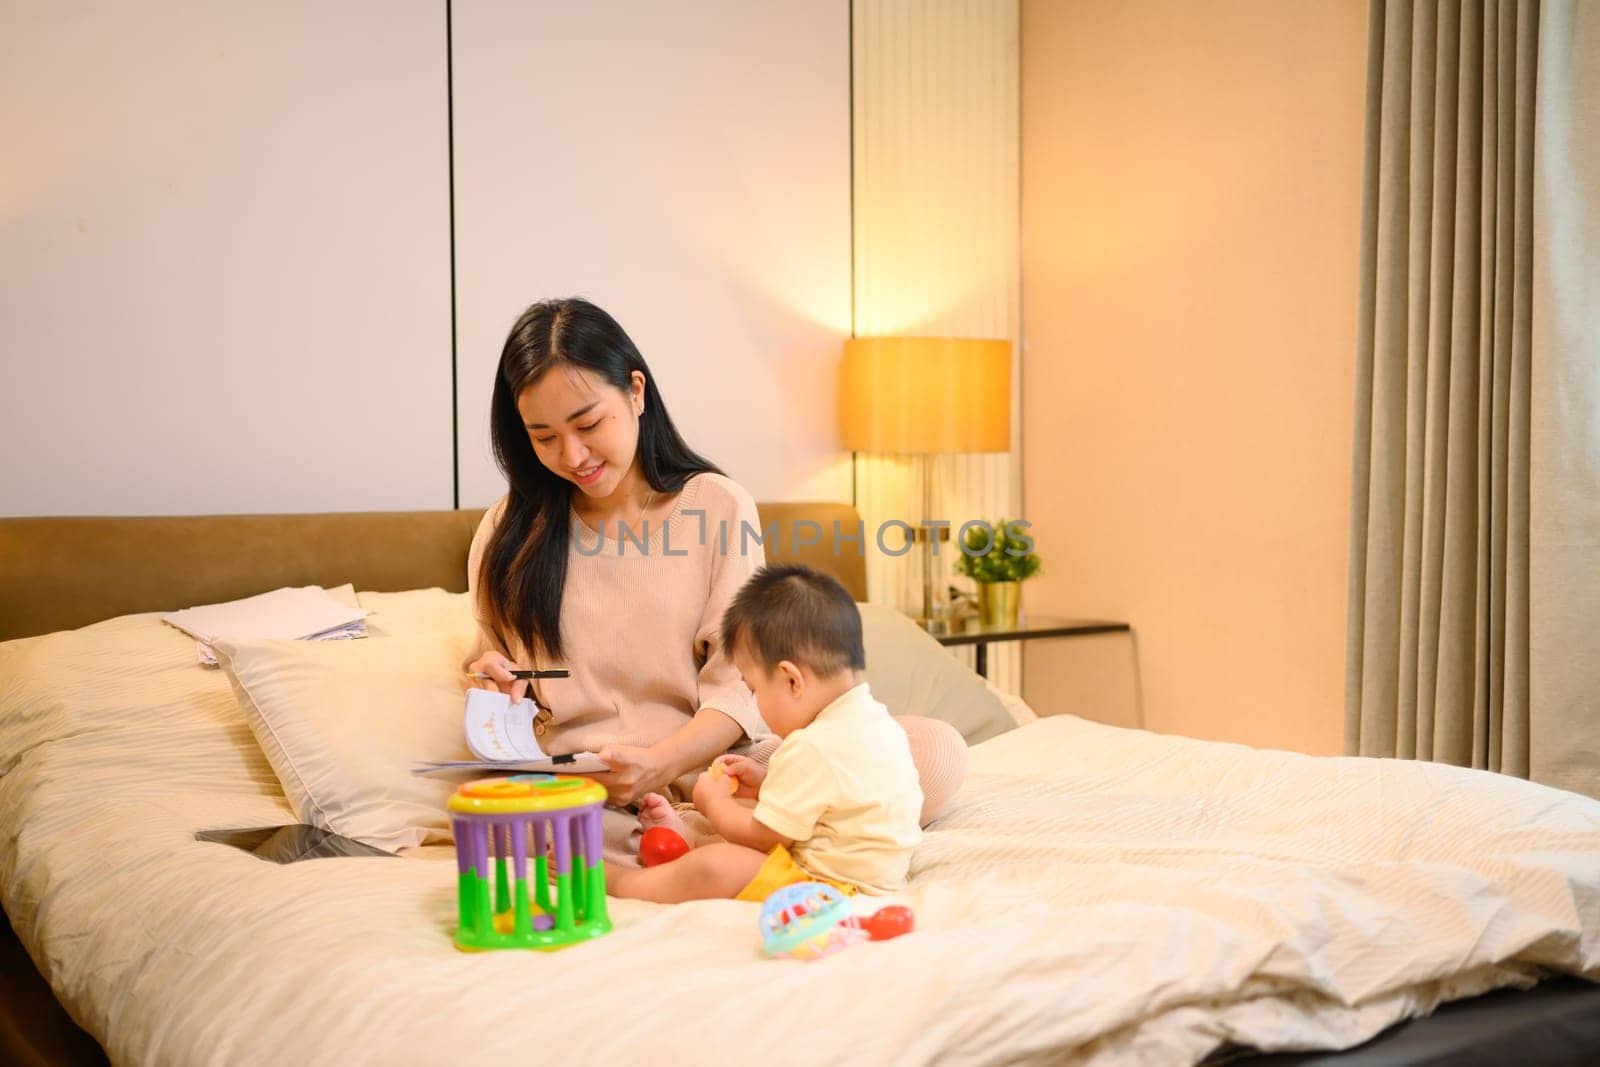 A cute baby boy playing toys in comfortable bed near working mother. Childcare and working mom concept by prathanchorruangsak